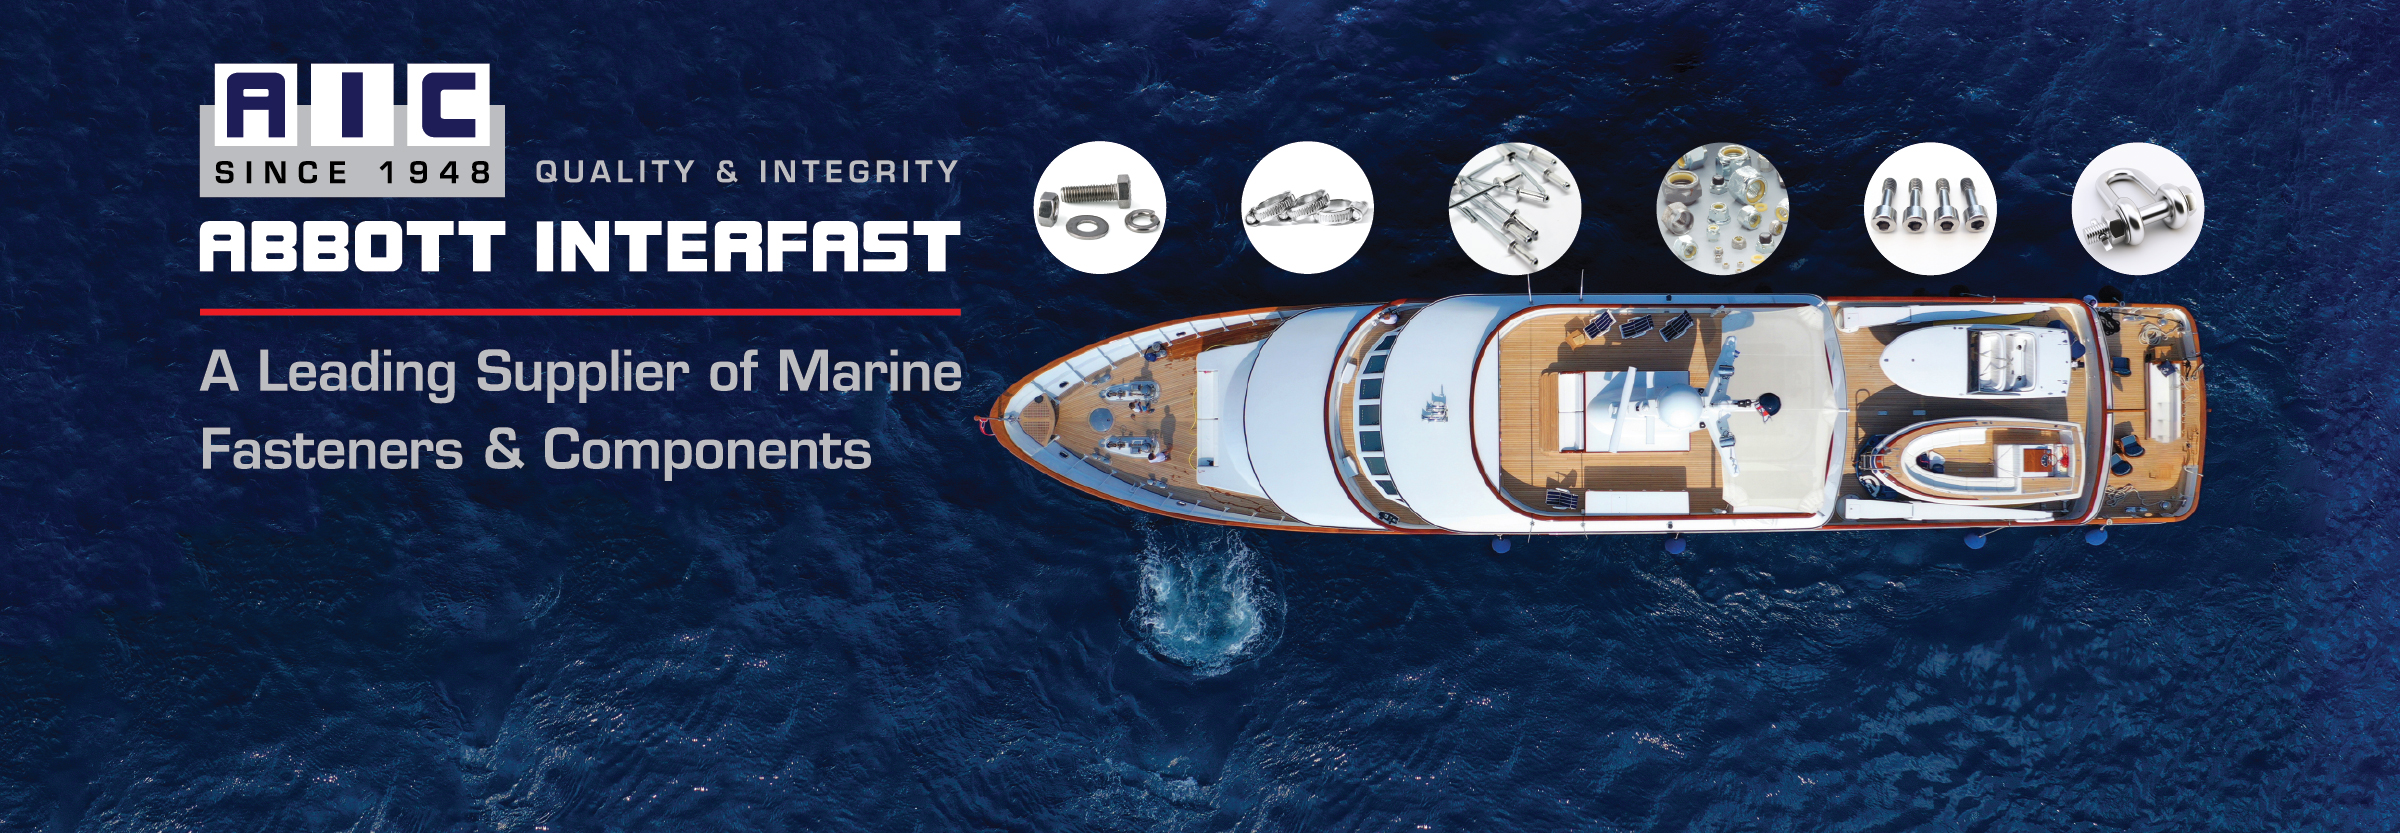 Boat out in the ocean showcasing marine application capabilities for Abbott Interfast  for supply of marine fasteners and components. Shows samples of each component near application in boat.